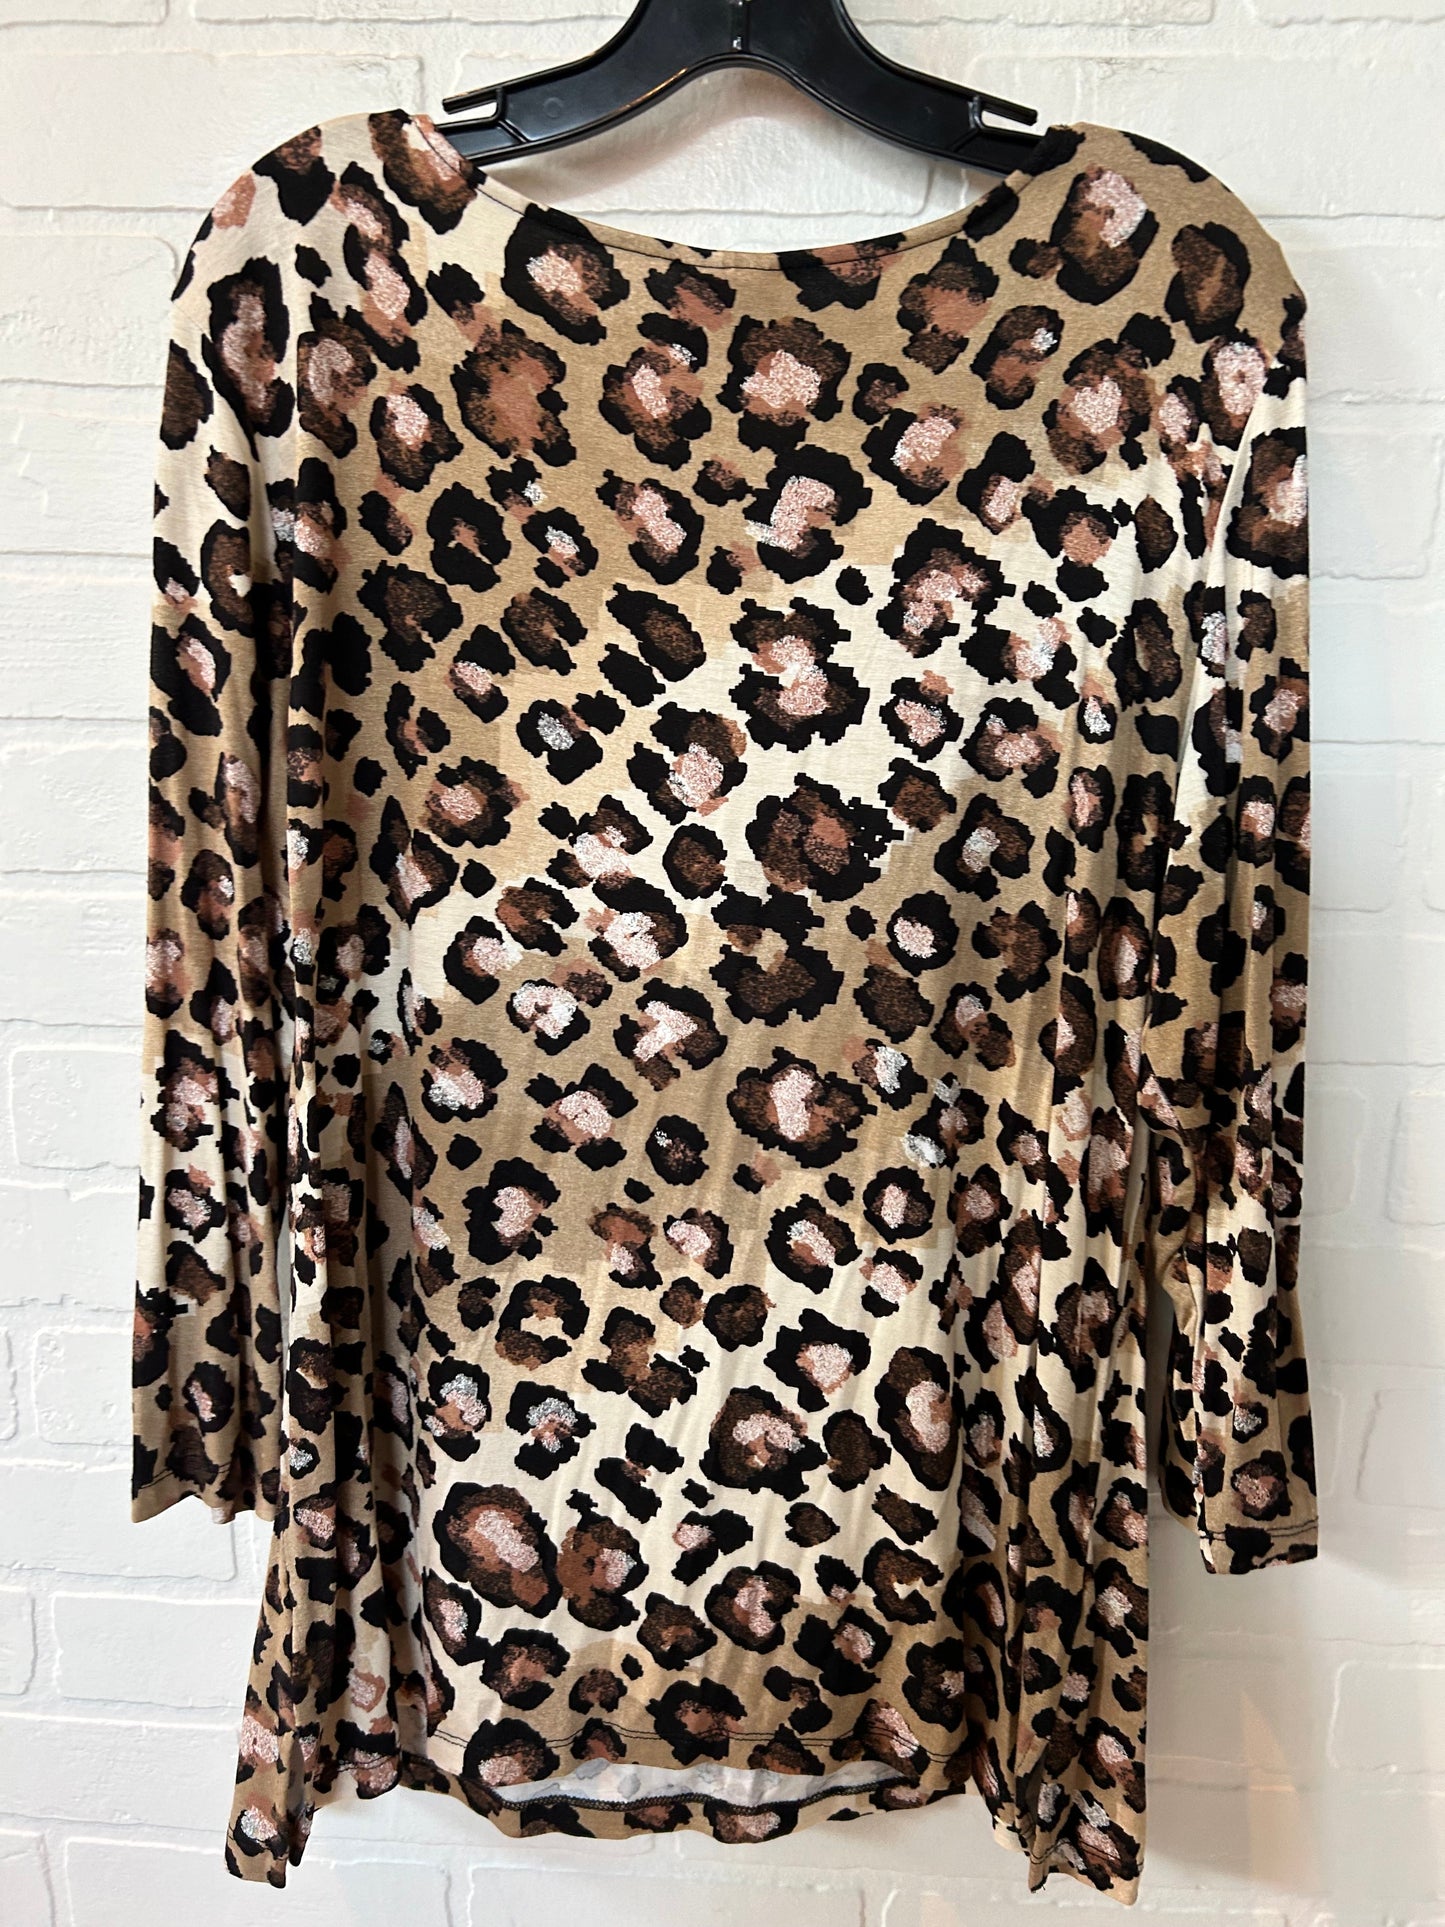 Animal Print Top 3/4 Sleeve Ruby Rd, Size L